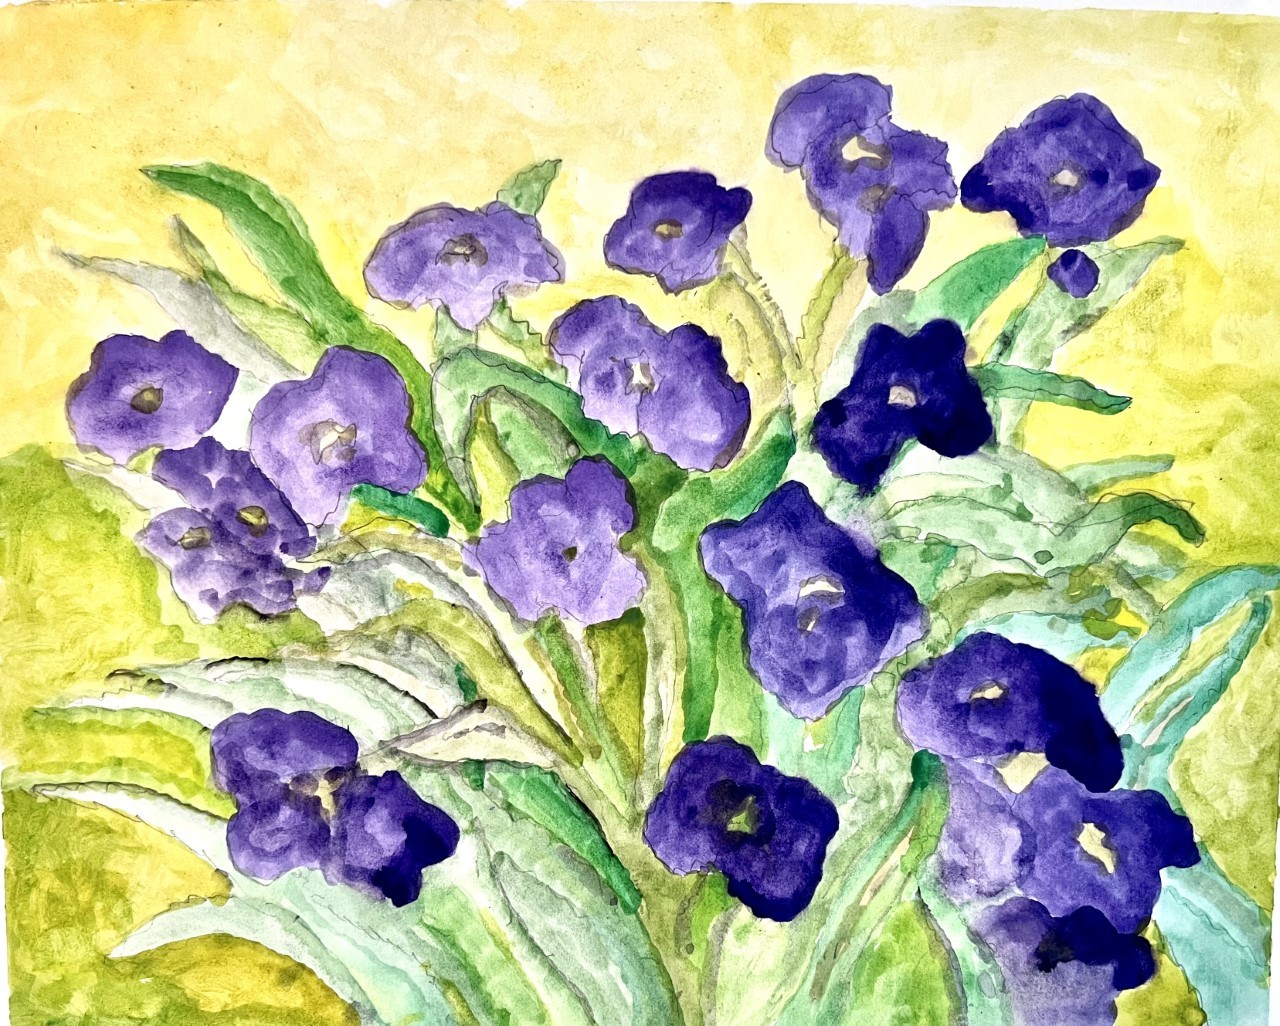 a painting of several pretty purple flowers growing with green stems and leaves against a yellow background, maybe in a field